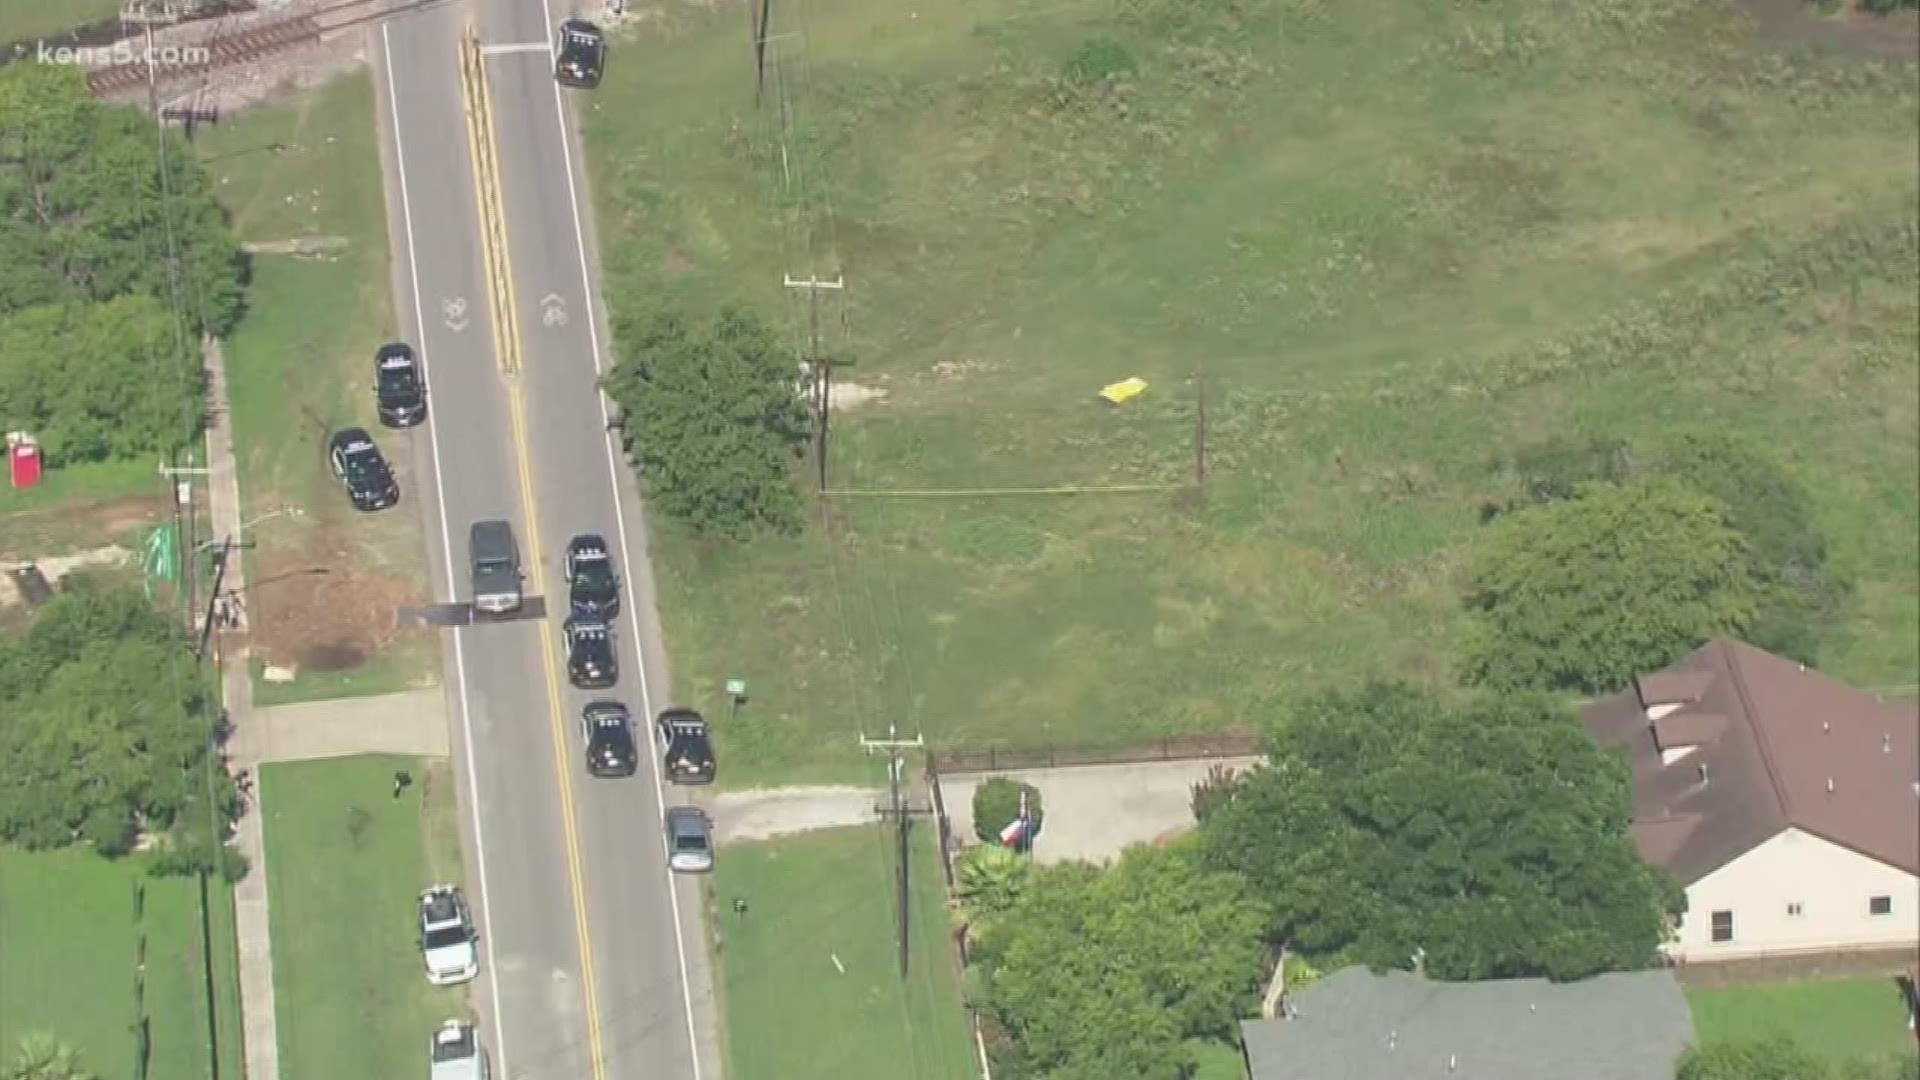 San Antonio police are investigating a suspicious death on the city's south side, where a body was found in a field next to a home.